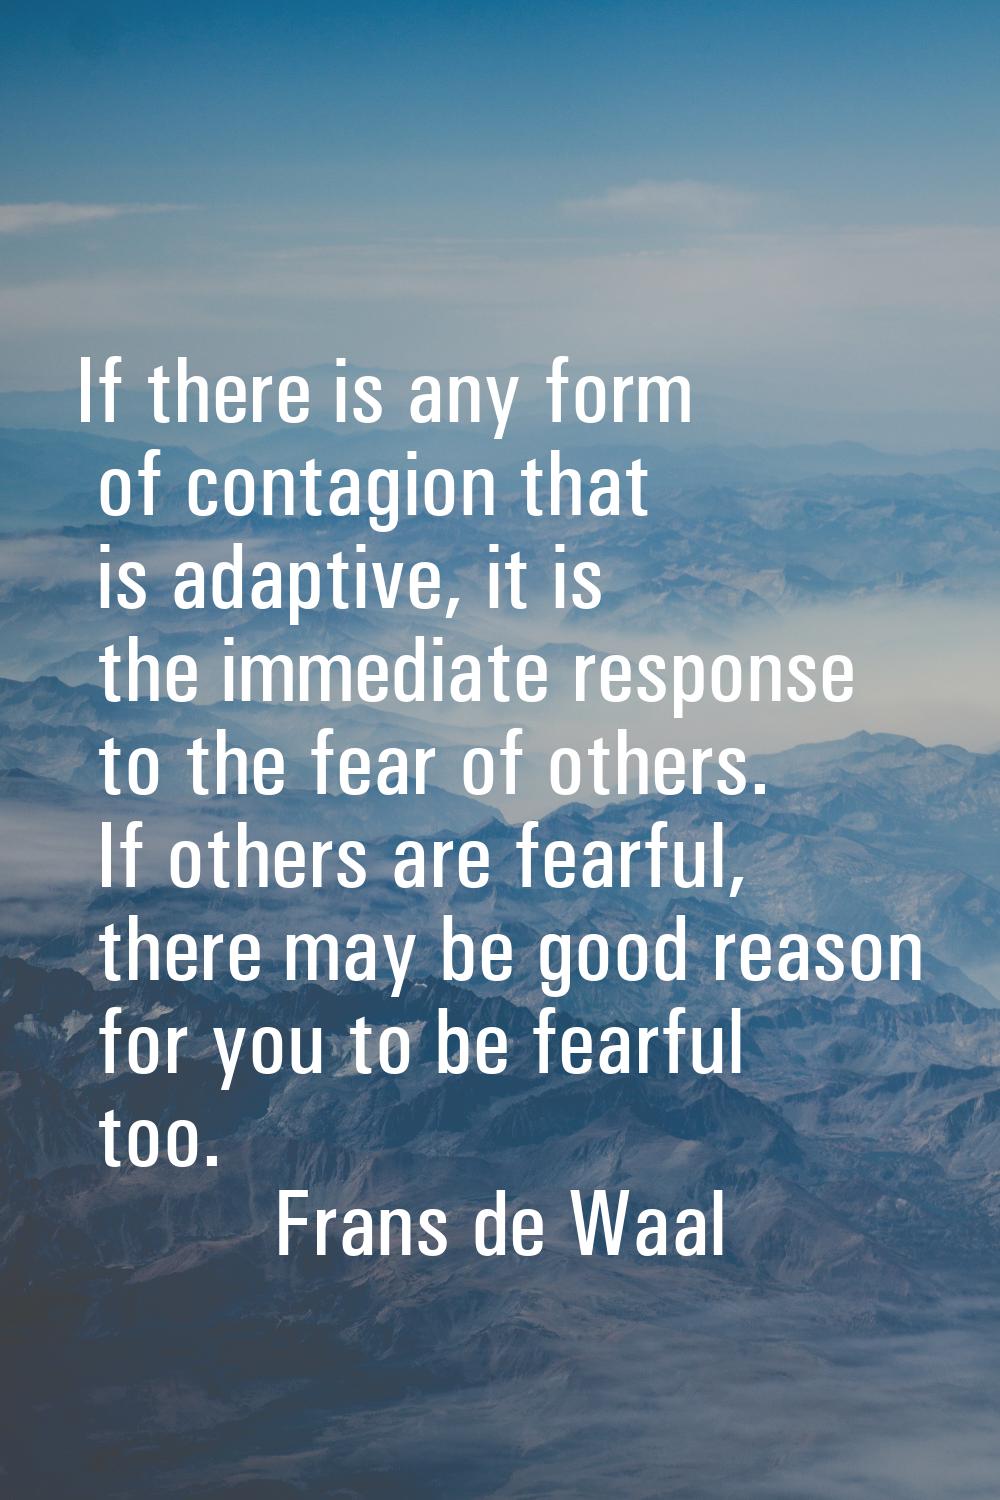 If there is any form of contagion that is adaptive, it is the immediate response to the fear of oth